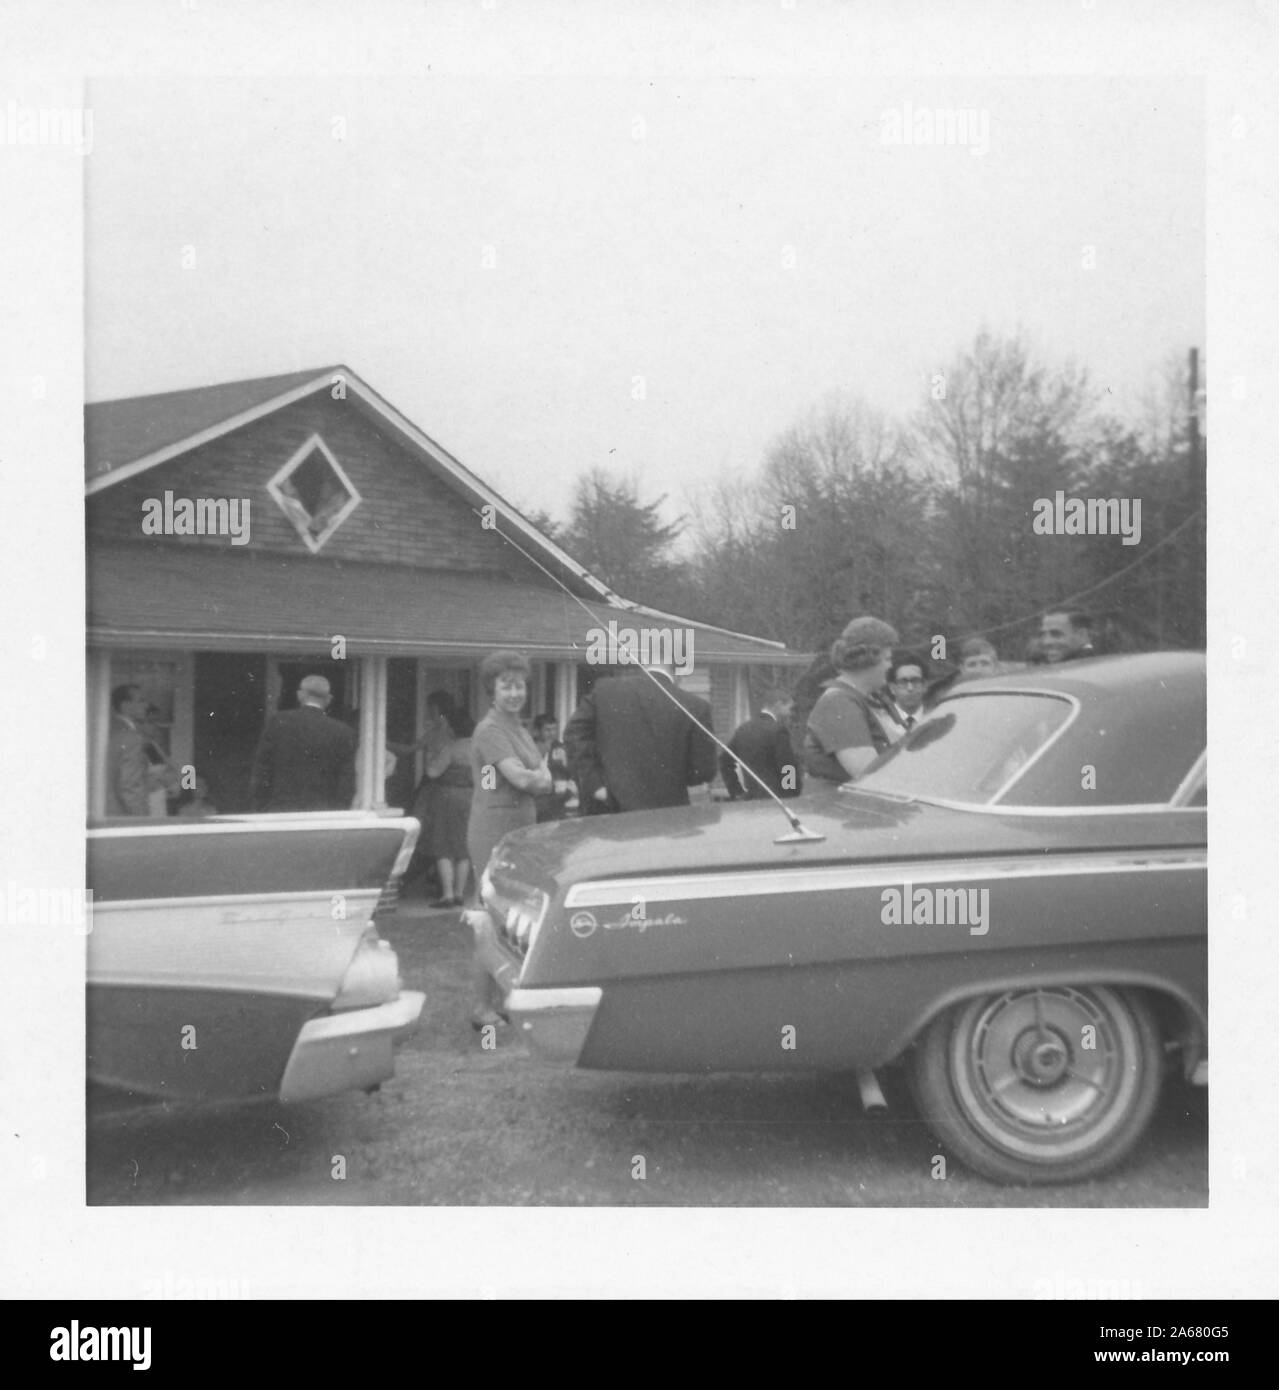 A small group of people stand outside near a brick building on an overcast day, with the tailfins of a Ford Thunderbird and the trunk of a Chevy Impala in the foreground, likely following a military funeral, United States of America, 1965. () Stock Photo